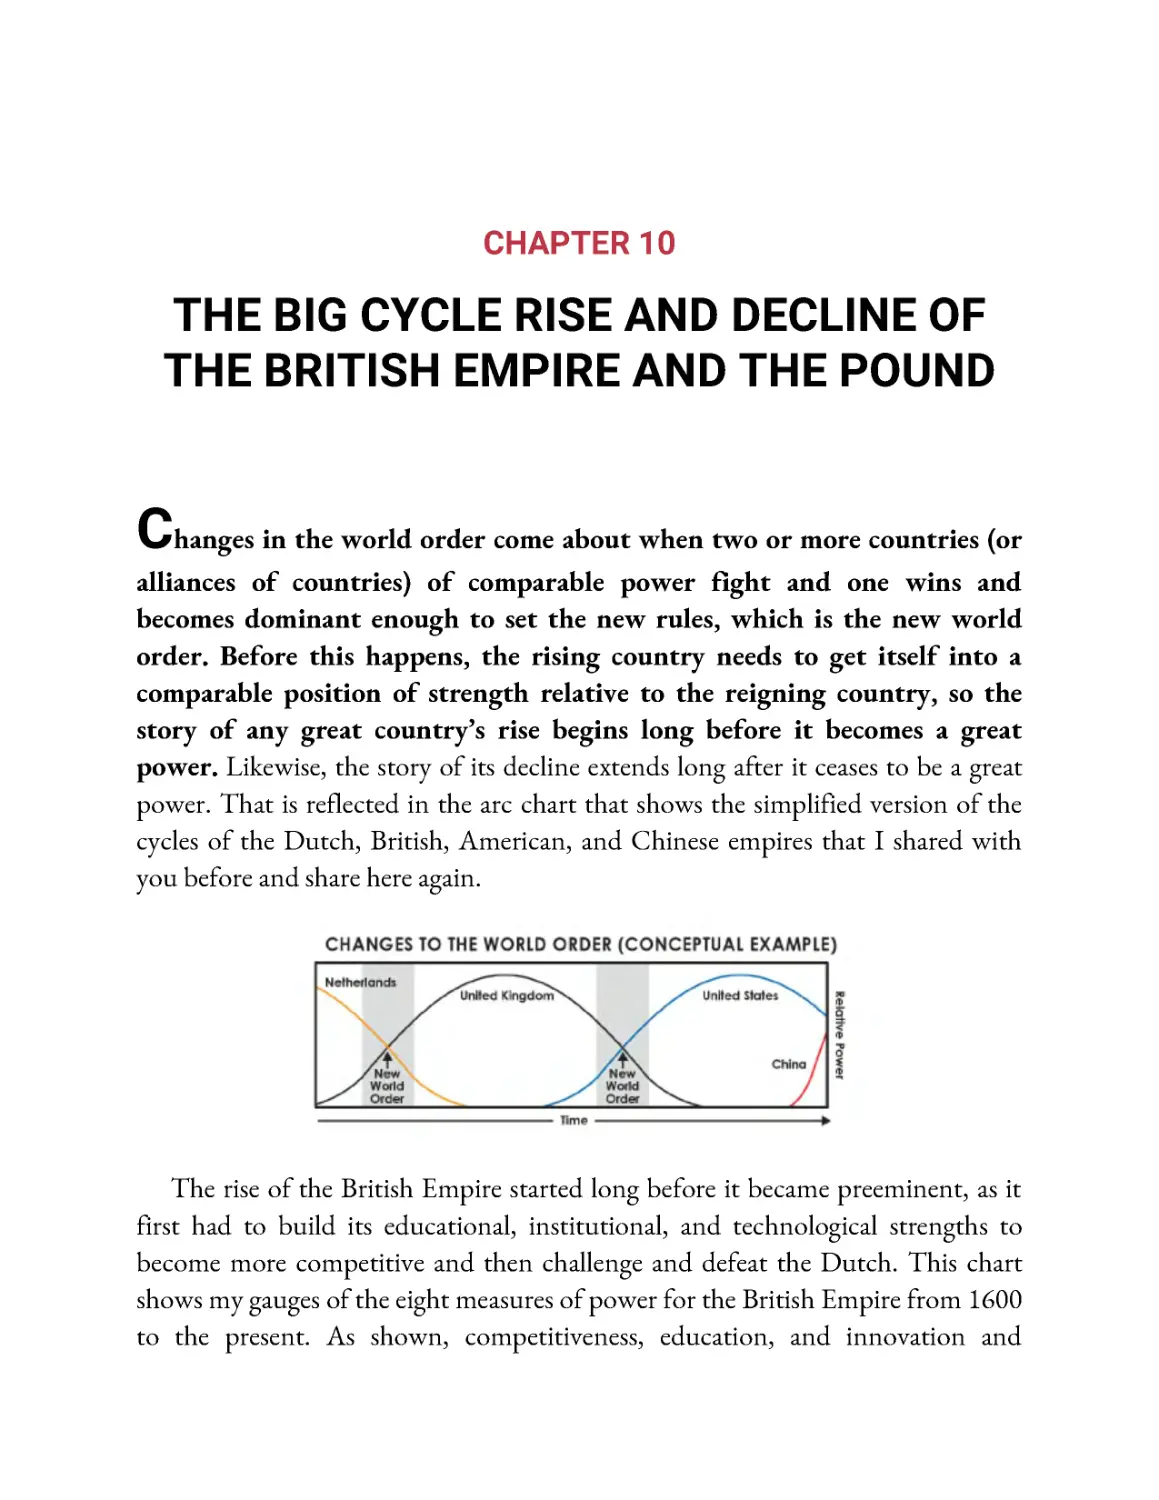 ﻿Chapter 10: The Big Cycle Rise and Decline of the British Empire and the Poun